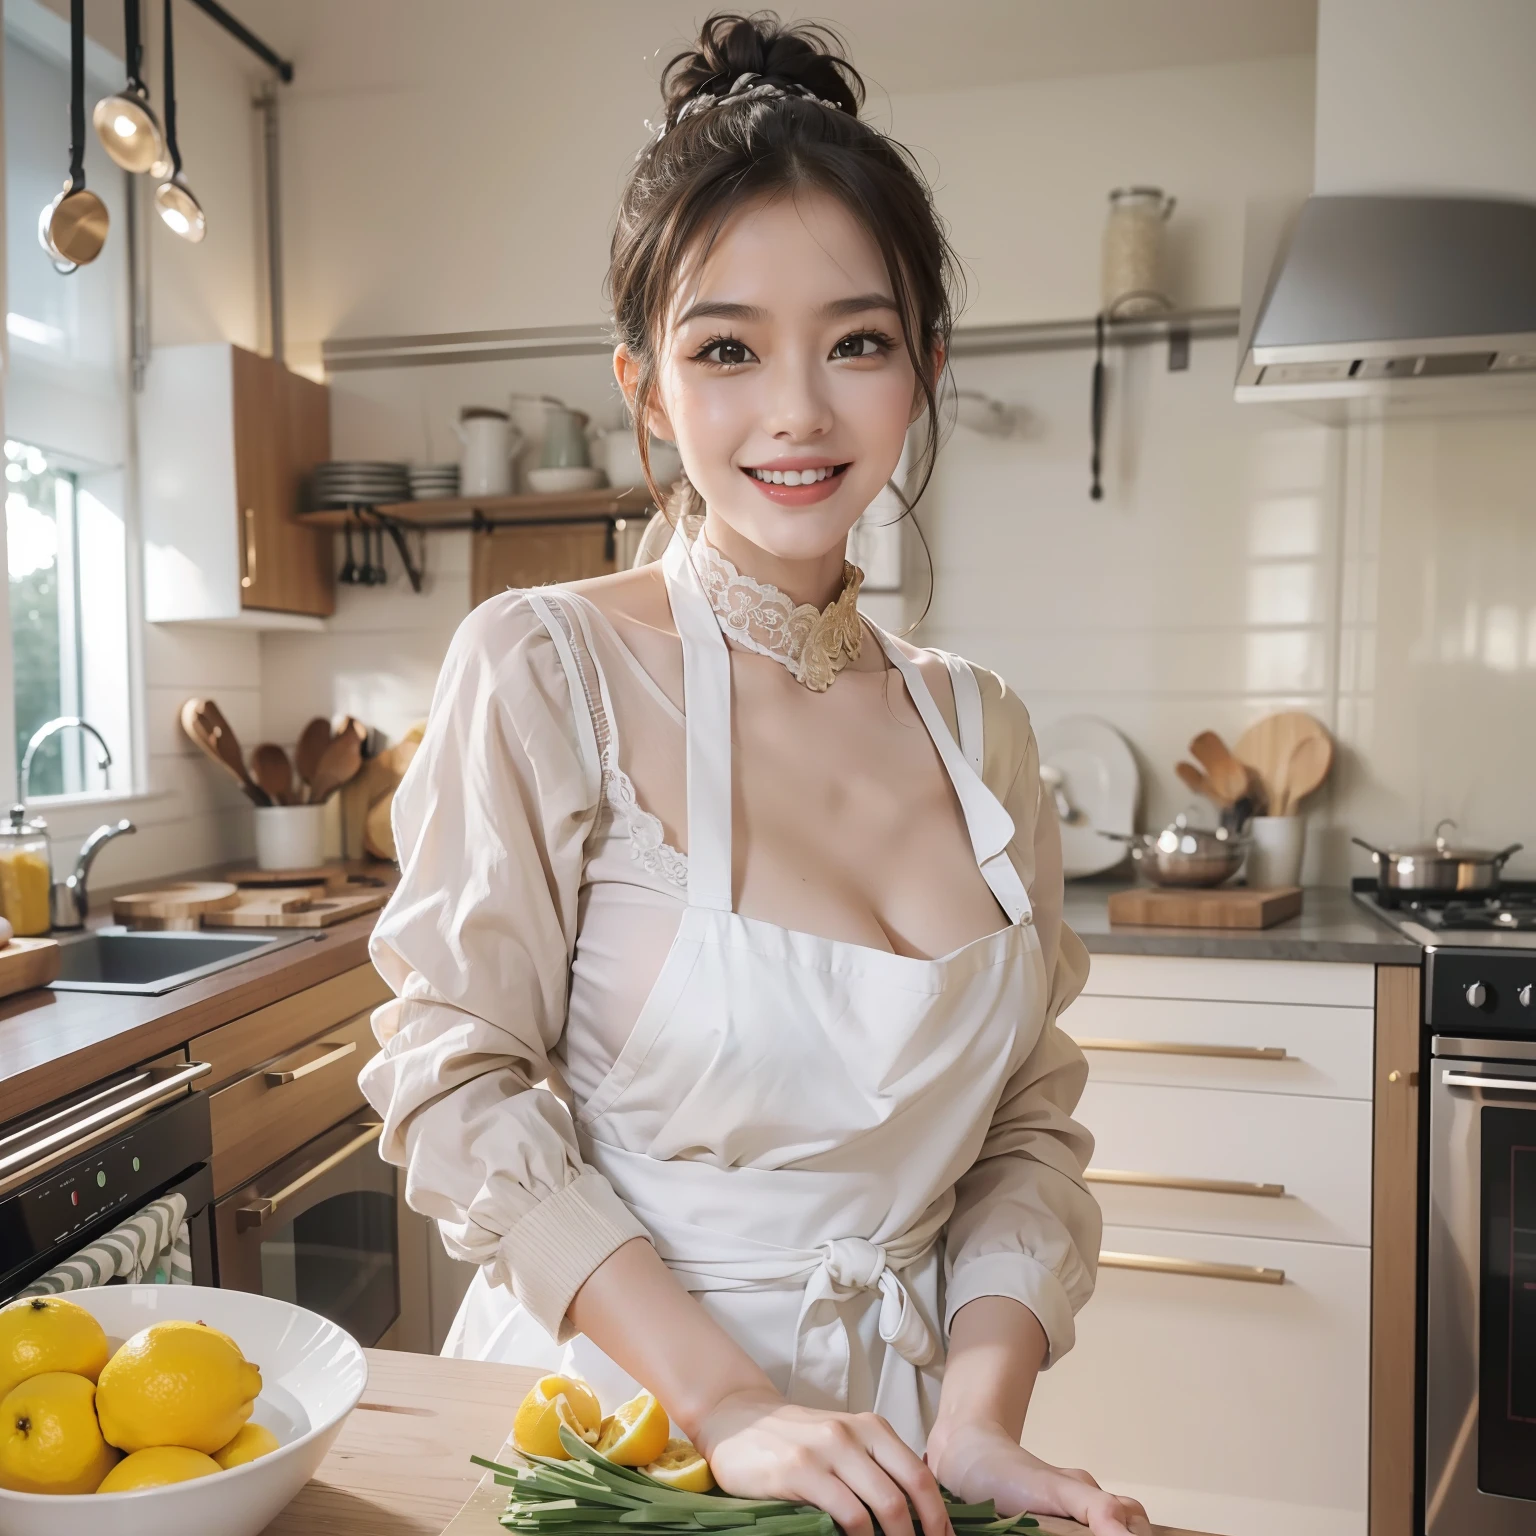 A woman cooking、(kitchin_aprons:1.Wear 3)、nice hand、4K、A high resolution、tmasterpiece、top-quality、wear cap:1.3、((hasselblad photograph))、Fine skin、sharp focus、(lighting like a movie)、Soft lighting、dynamic ungle、[:(Detailed face:1.2):0.2]、Medium chest、Sweat runs down the skin:1.2、(((In the kitchen))) A smile　Beautiful profile　Colossal tits　Beautiful body　tying  hair　Wide background々and luxurious living room　Luxurious and luxurious living　Luxurious living room　Beautiful living room　Beautiful living room　A smile　an orange　lemons　A smile　Laughing　Bananas in　pineapples　Luxurious room　beautiful light up　Beautiful lighting　Very large room　very high image quality　very high res　8K photos　Viewer's perspective　Very gorgeous kitchen　Luxury kitchen　Gilet blanc　White apron　Millionaire Kitchen　Luxury kitchen